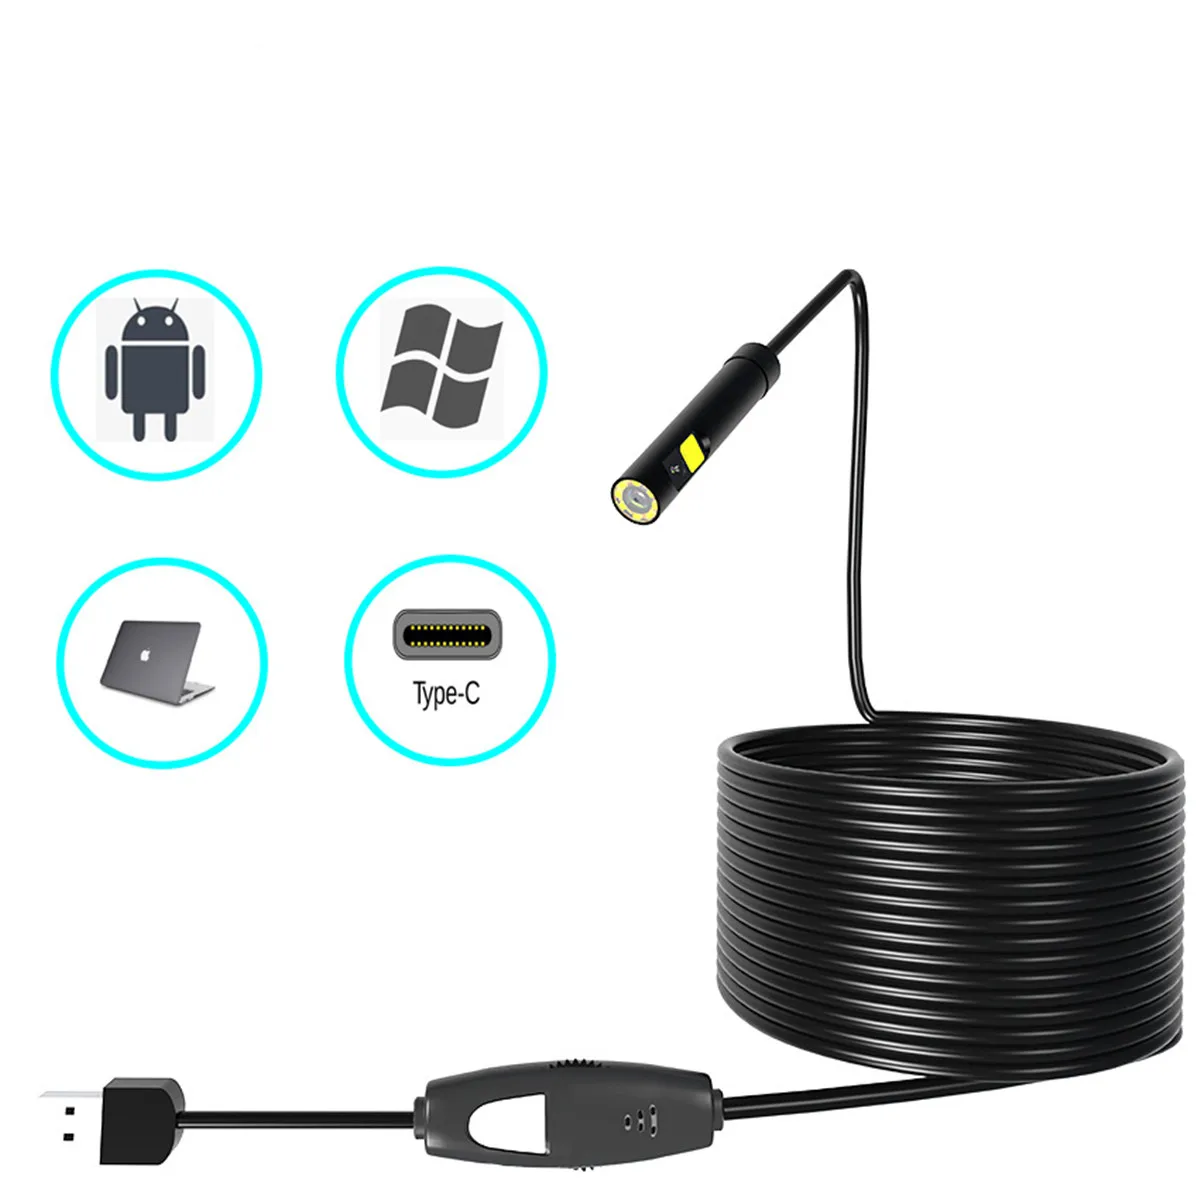 2MP 8MM 3in1 USB Dual Lens Endoscope Camera For Android&Computer CMOS Borescope Inspection  Digital Microscope Otoscope p30 endoscope camera 8mm dual lens hd1080p snake tube rigid cable ip68 waterproof inspection borescope easy to use